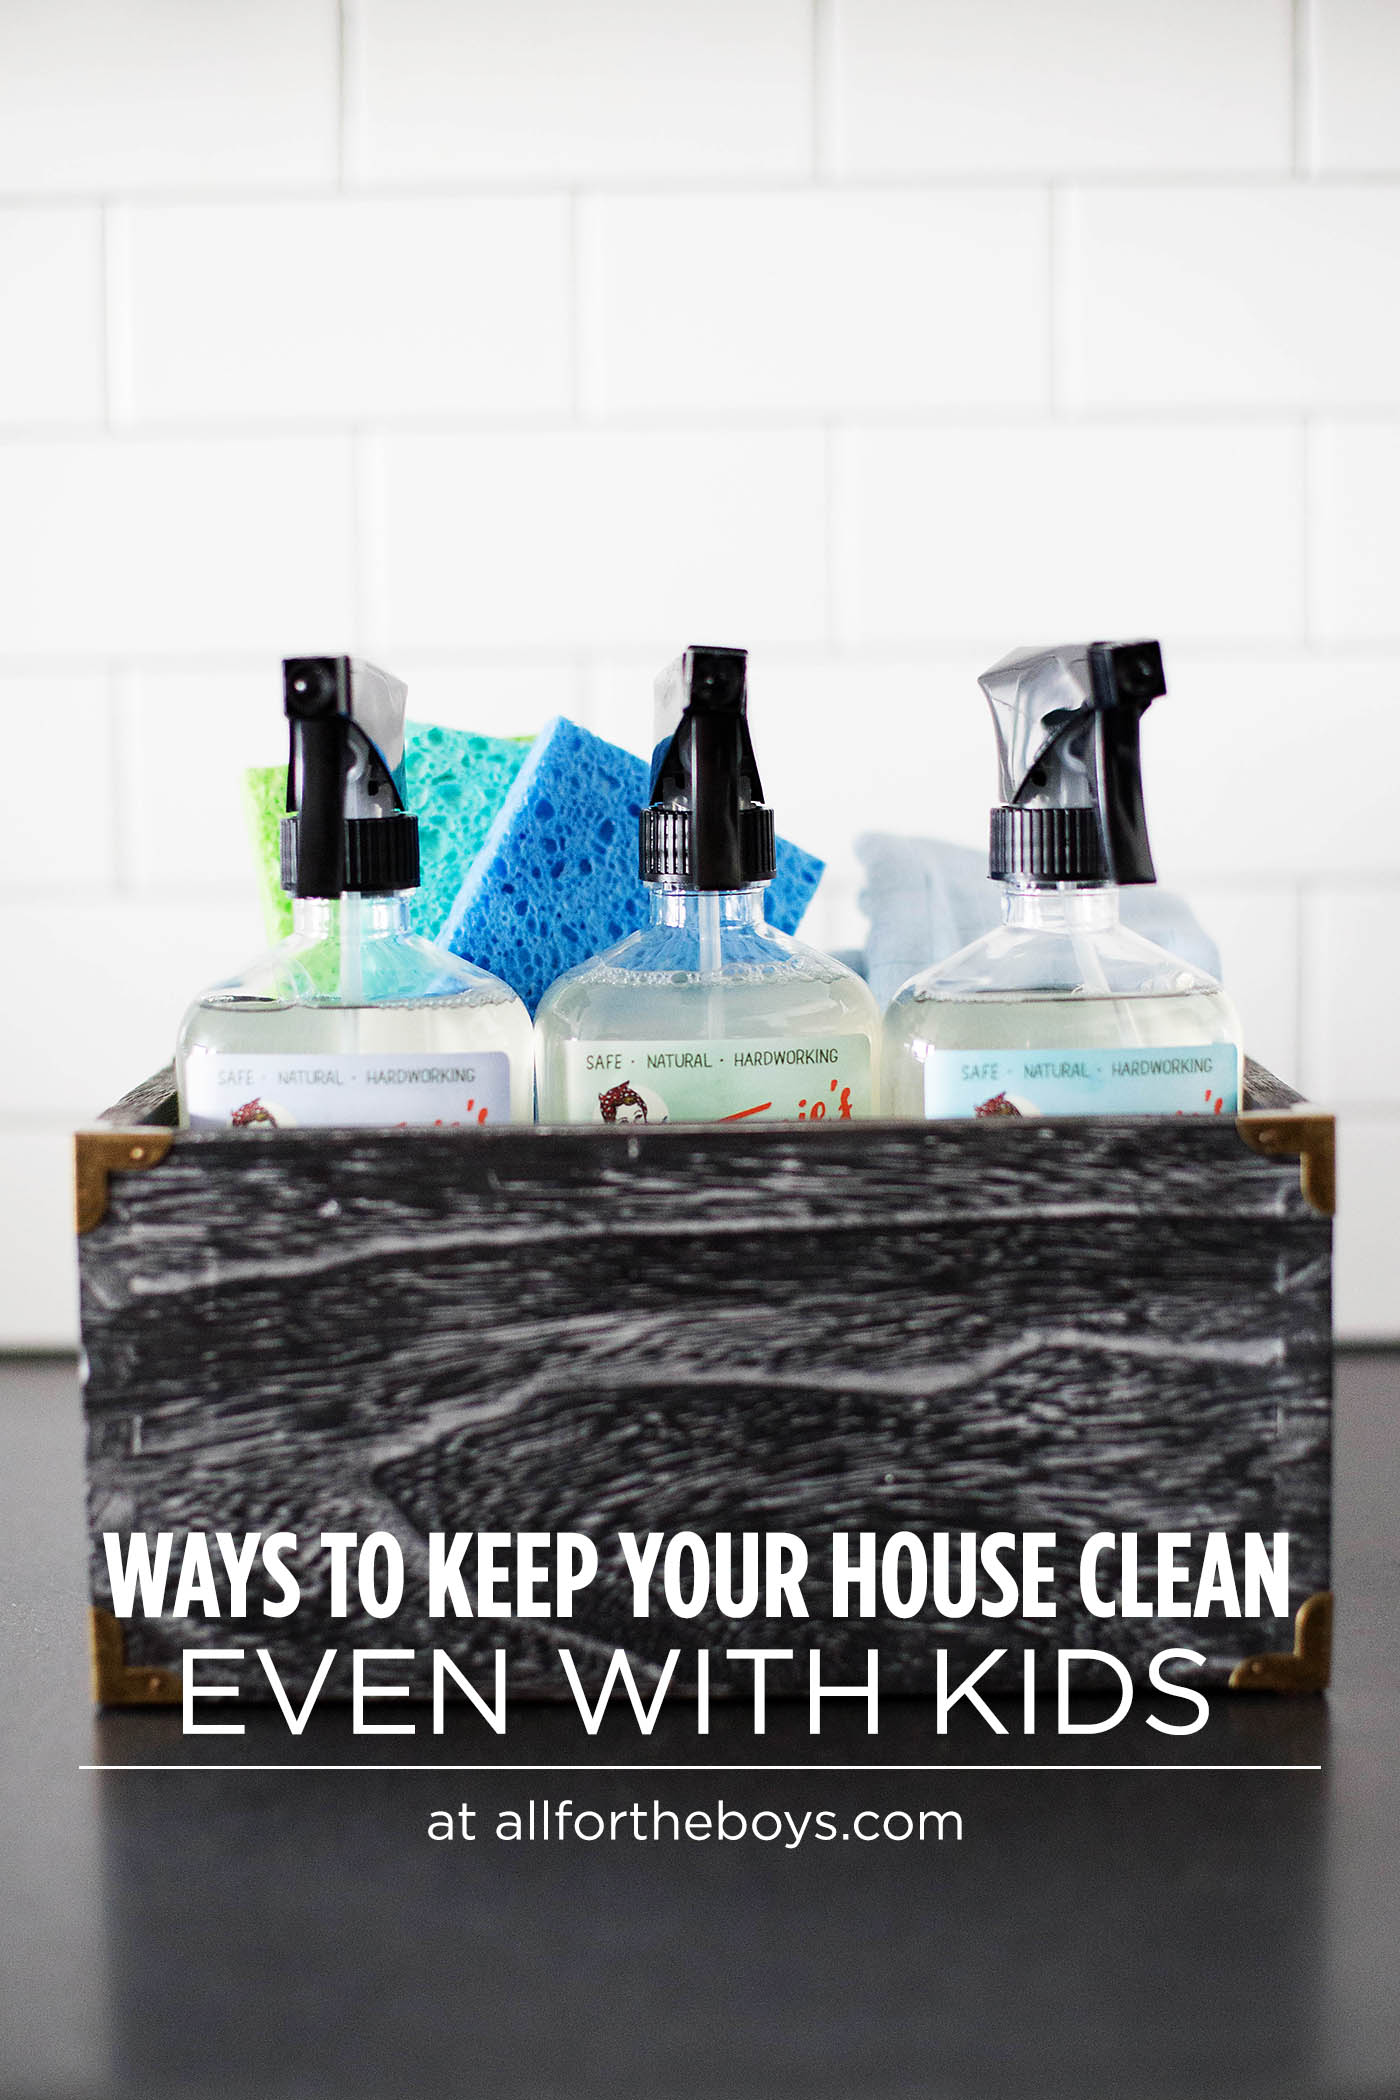 Tips for keeping your house clean with kids #HealthierHousekeeping #PlantBased #NaturalCleaning